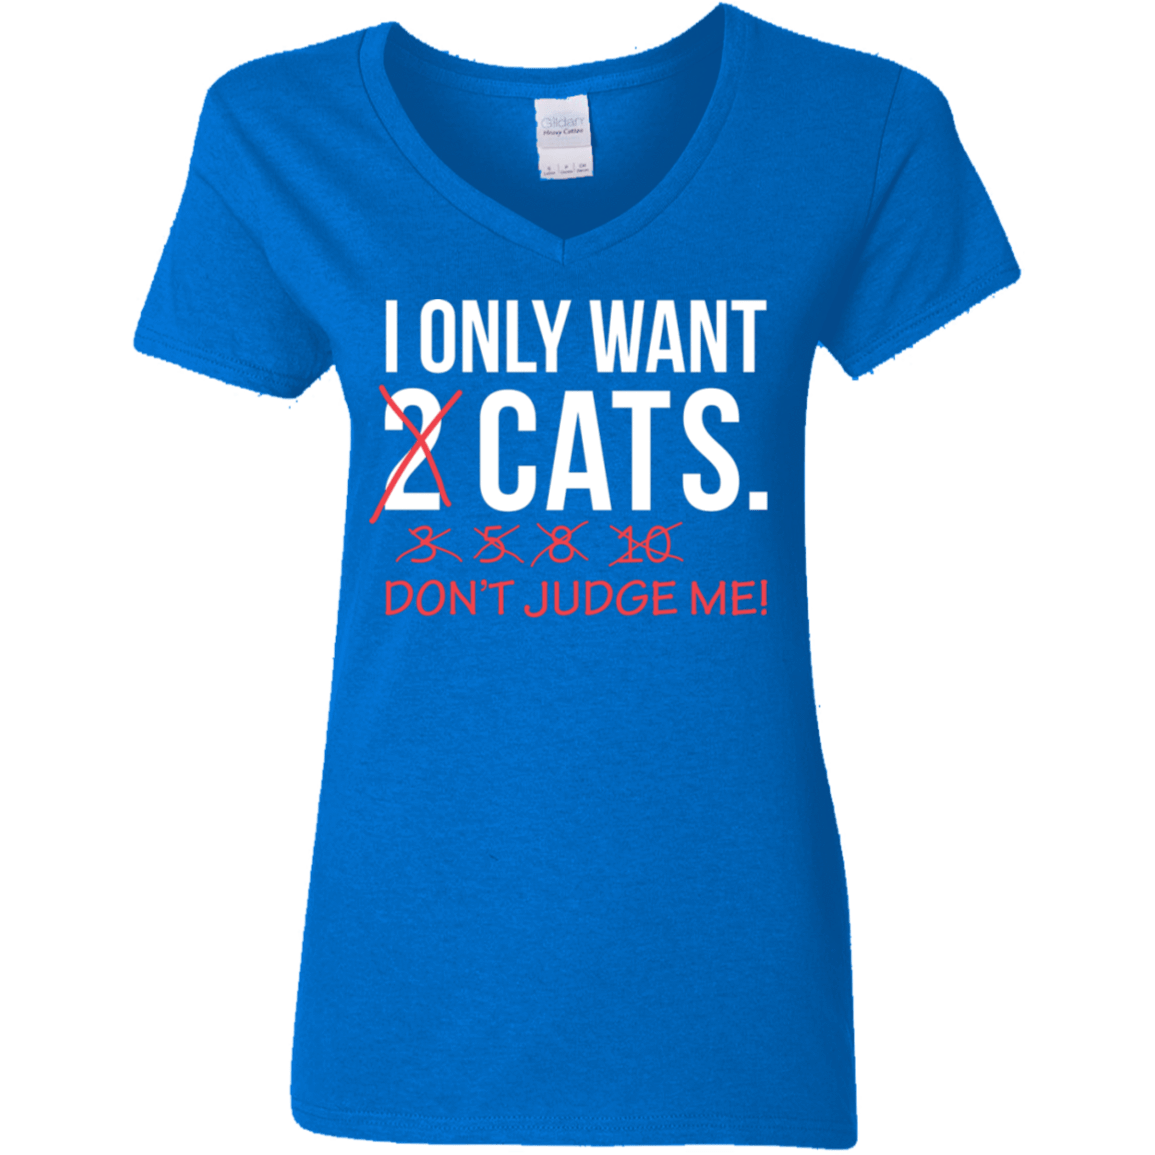 I Only Want 2 Cats - Ladies V Neck.